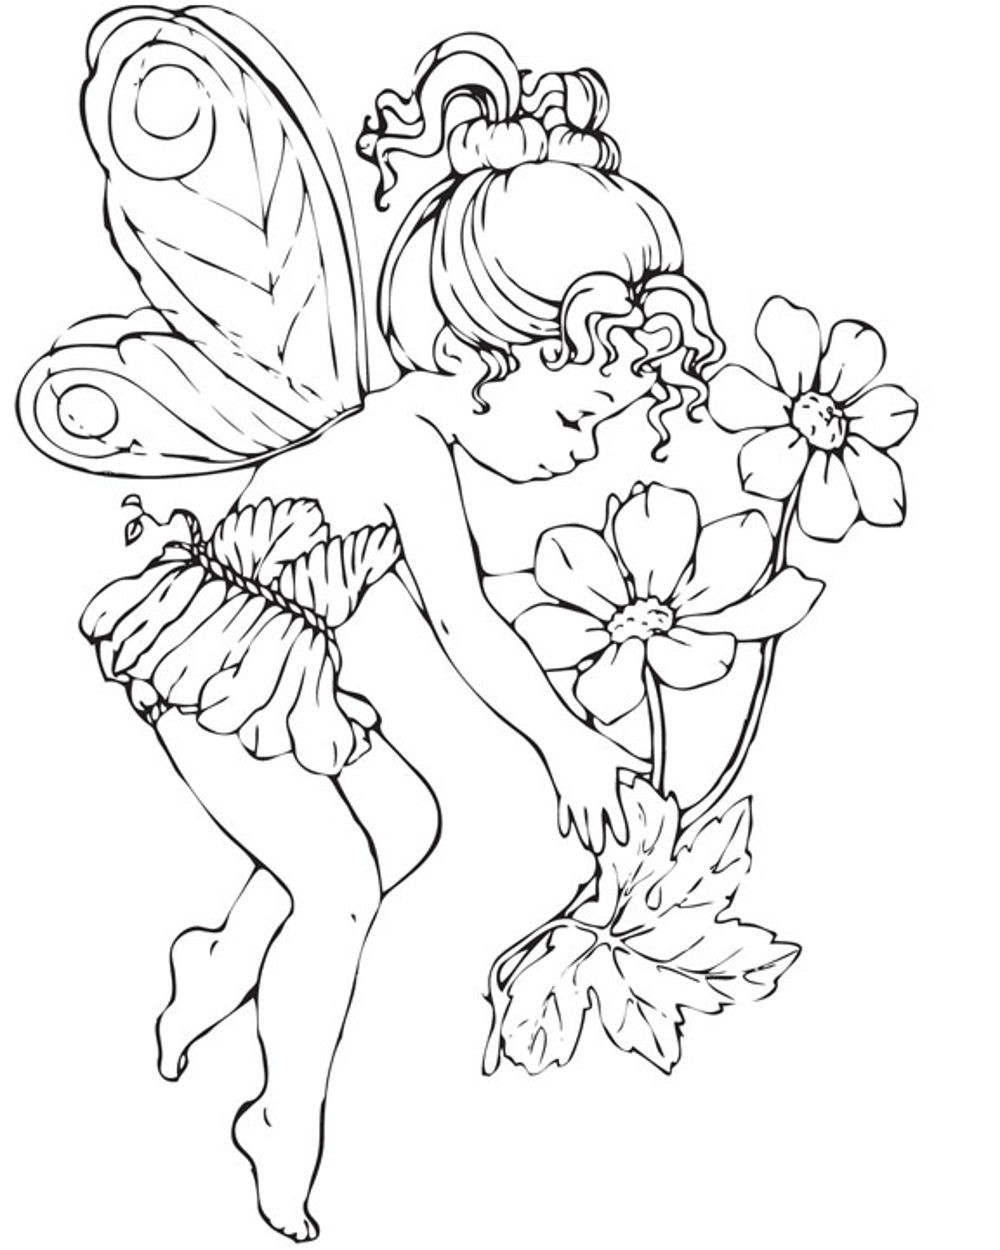 Planting Fairy Coloring Page coloring page